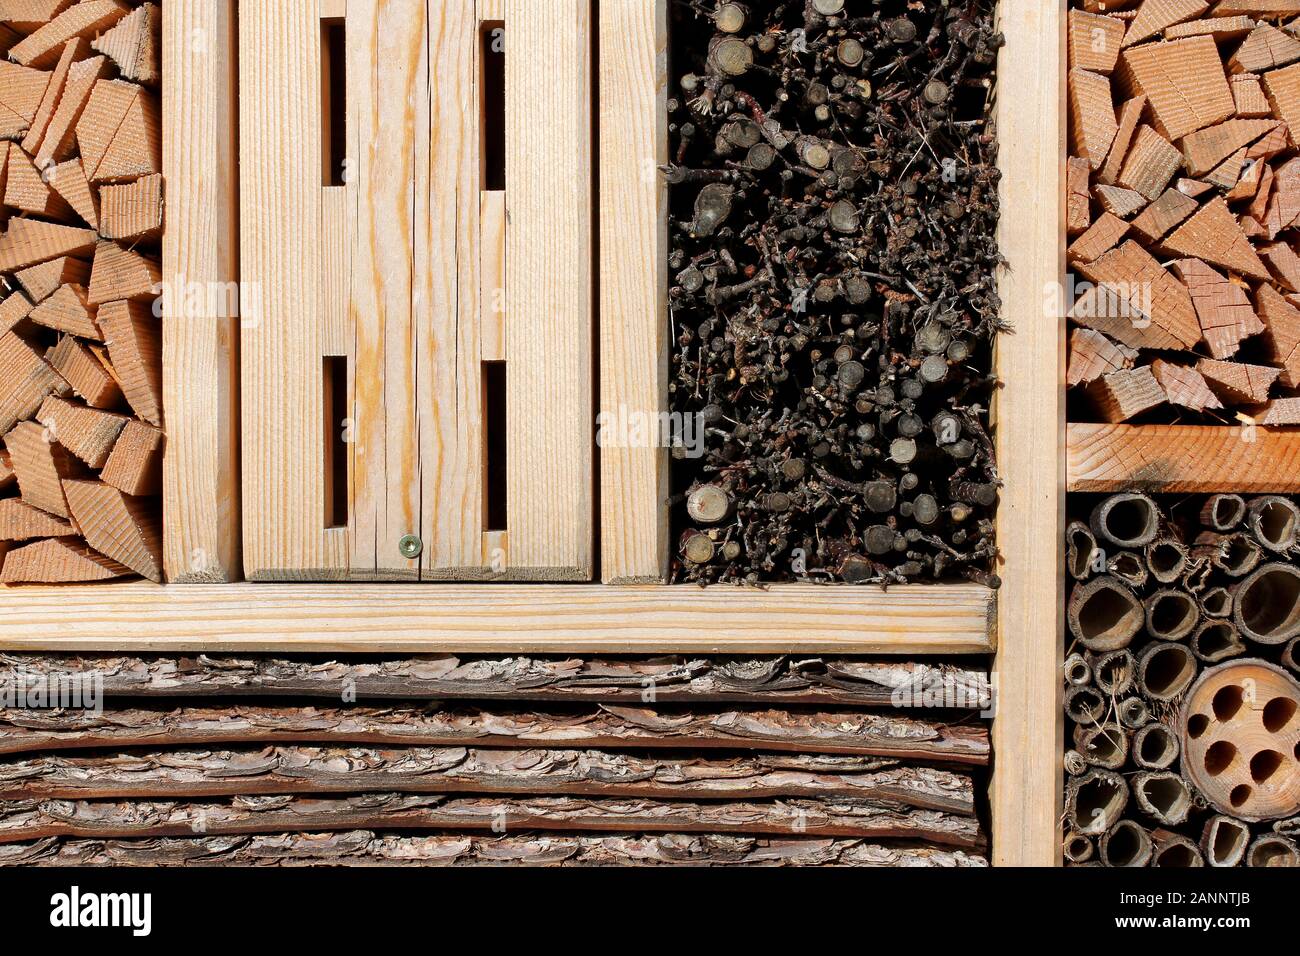 Insect hotel for wintering Stock Photo